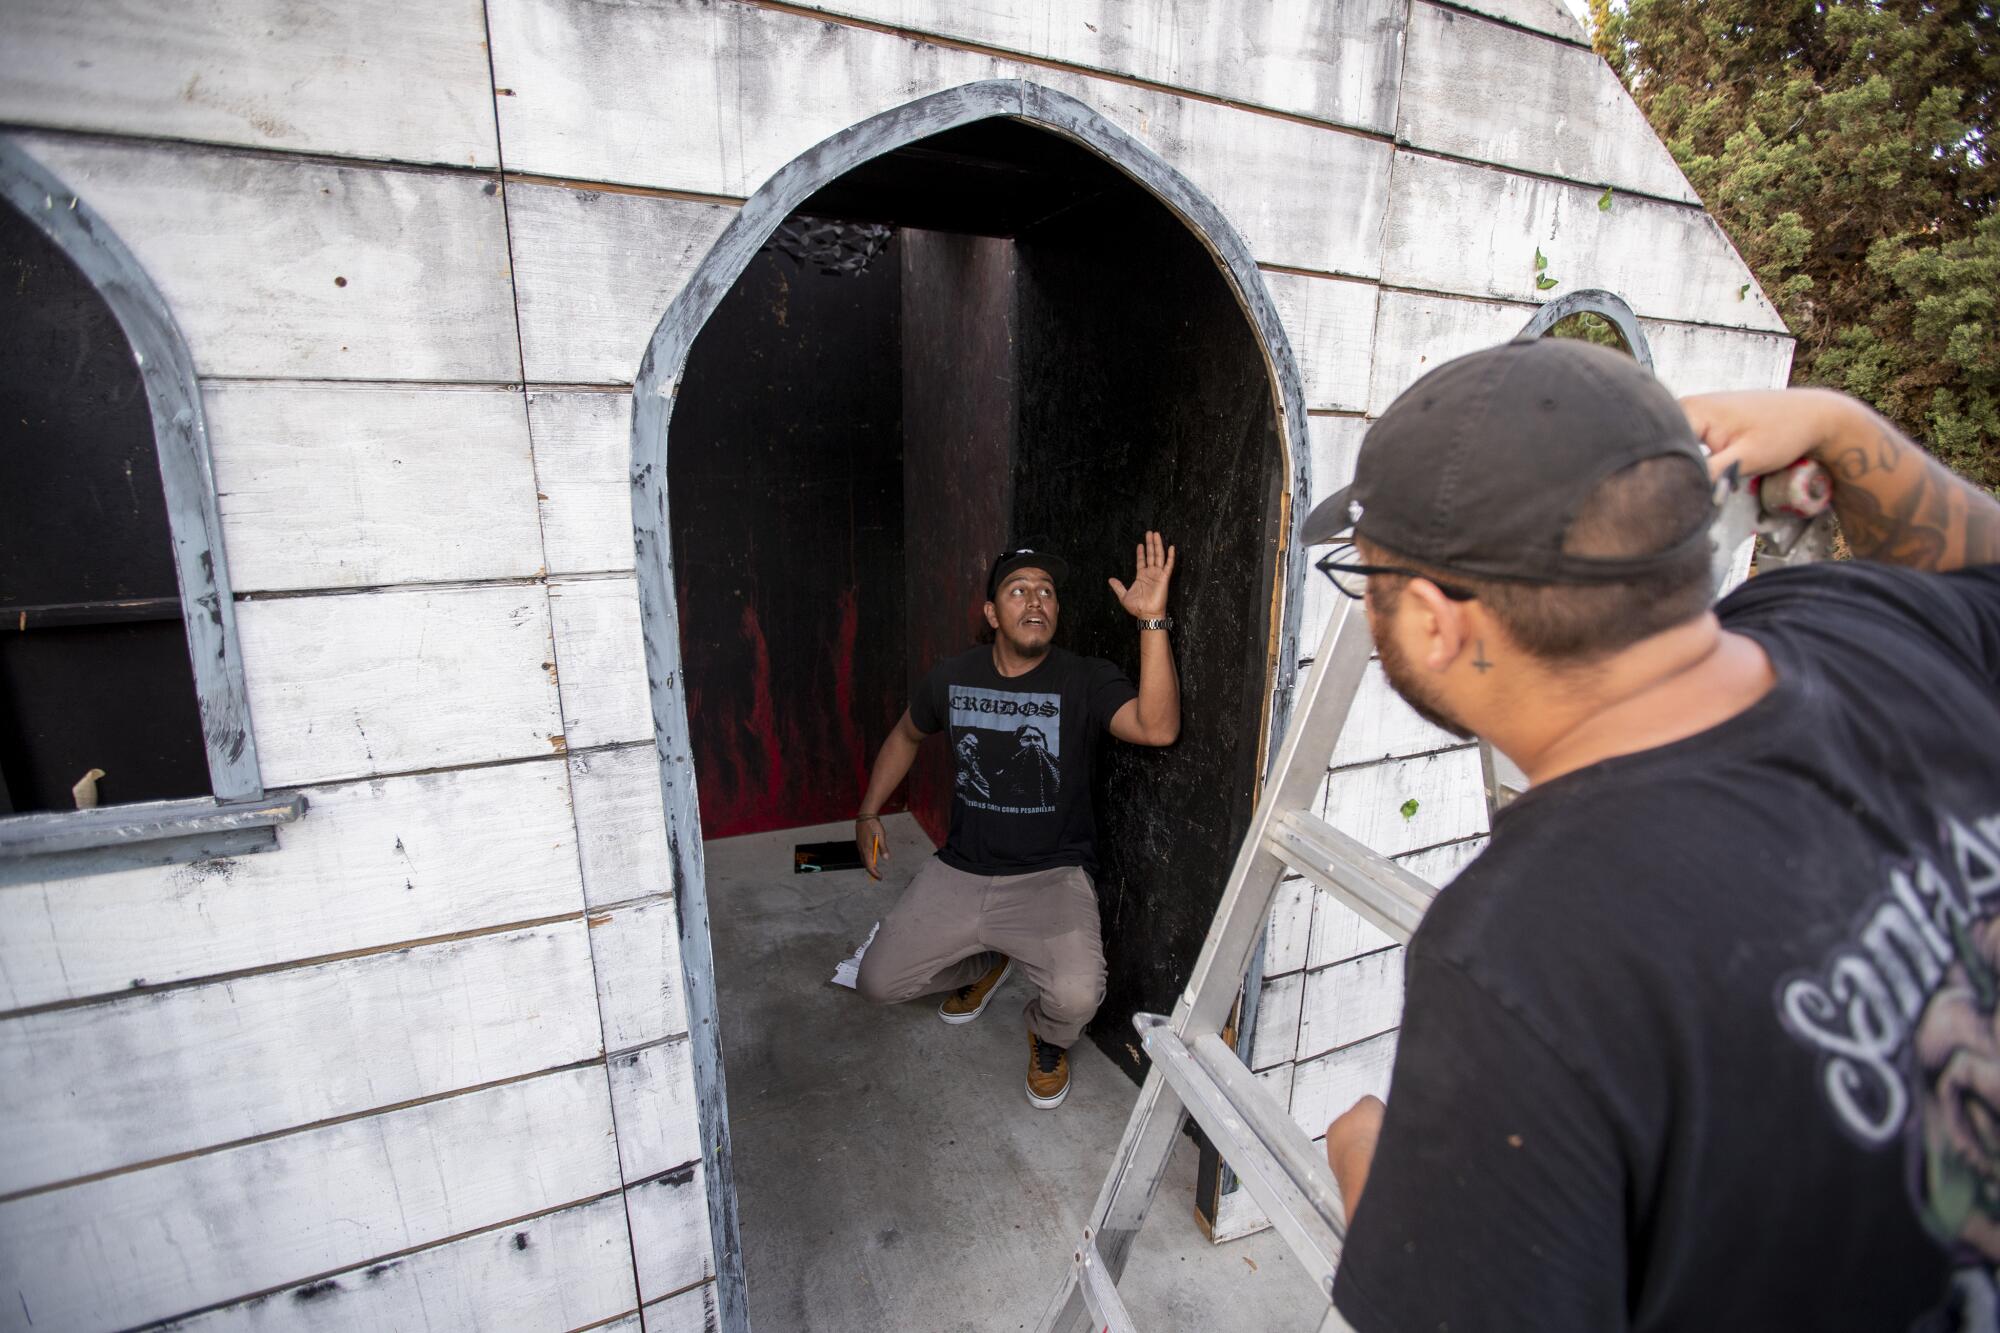 Two men discuss plans for halloween haunted house called Santa Ana Haunt at Garcia's father's home in Santa Ana.